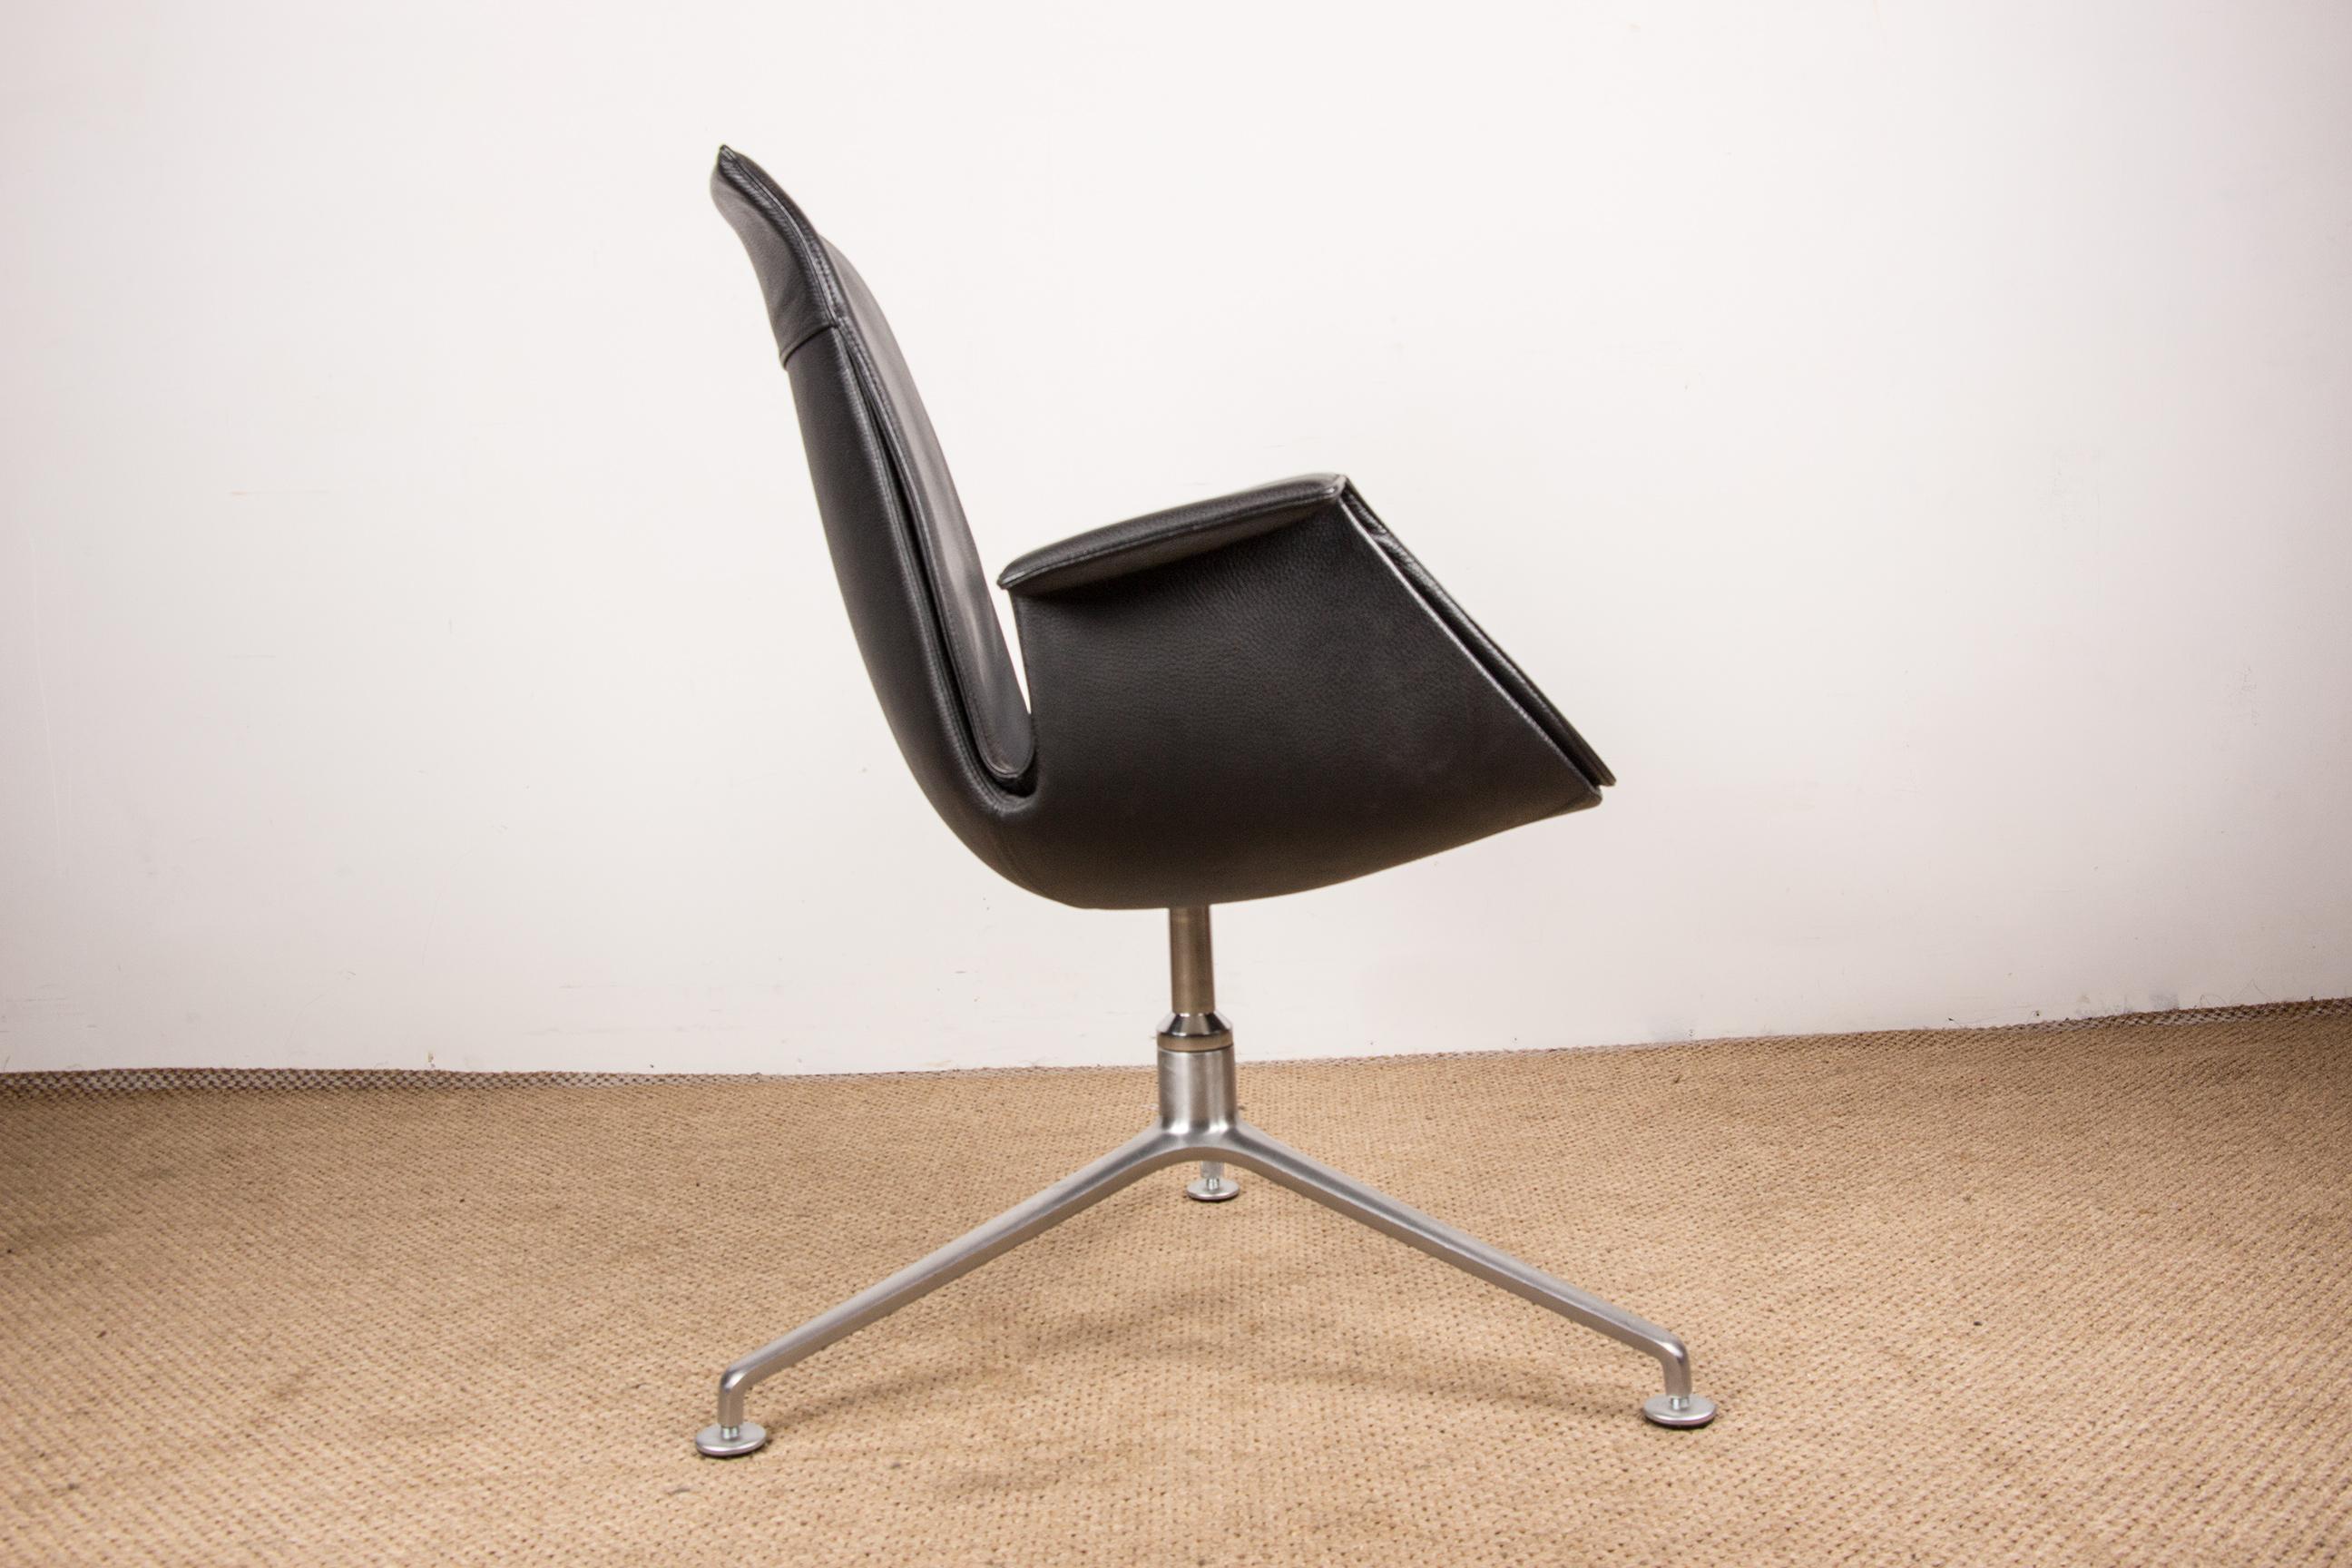 Contemporary Danish Armchair, Black Leather and Chromed Steel, model FK 6725 Fabricius/Knoll. For Sale